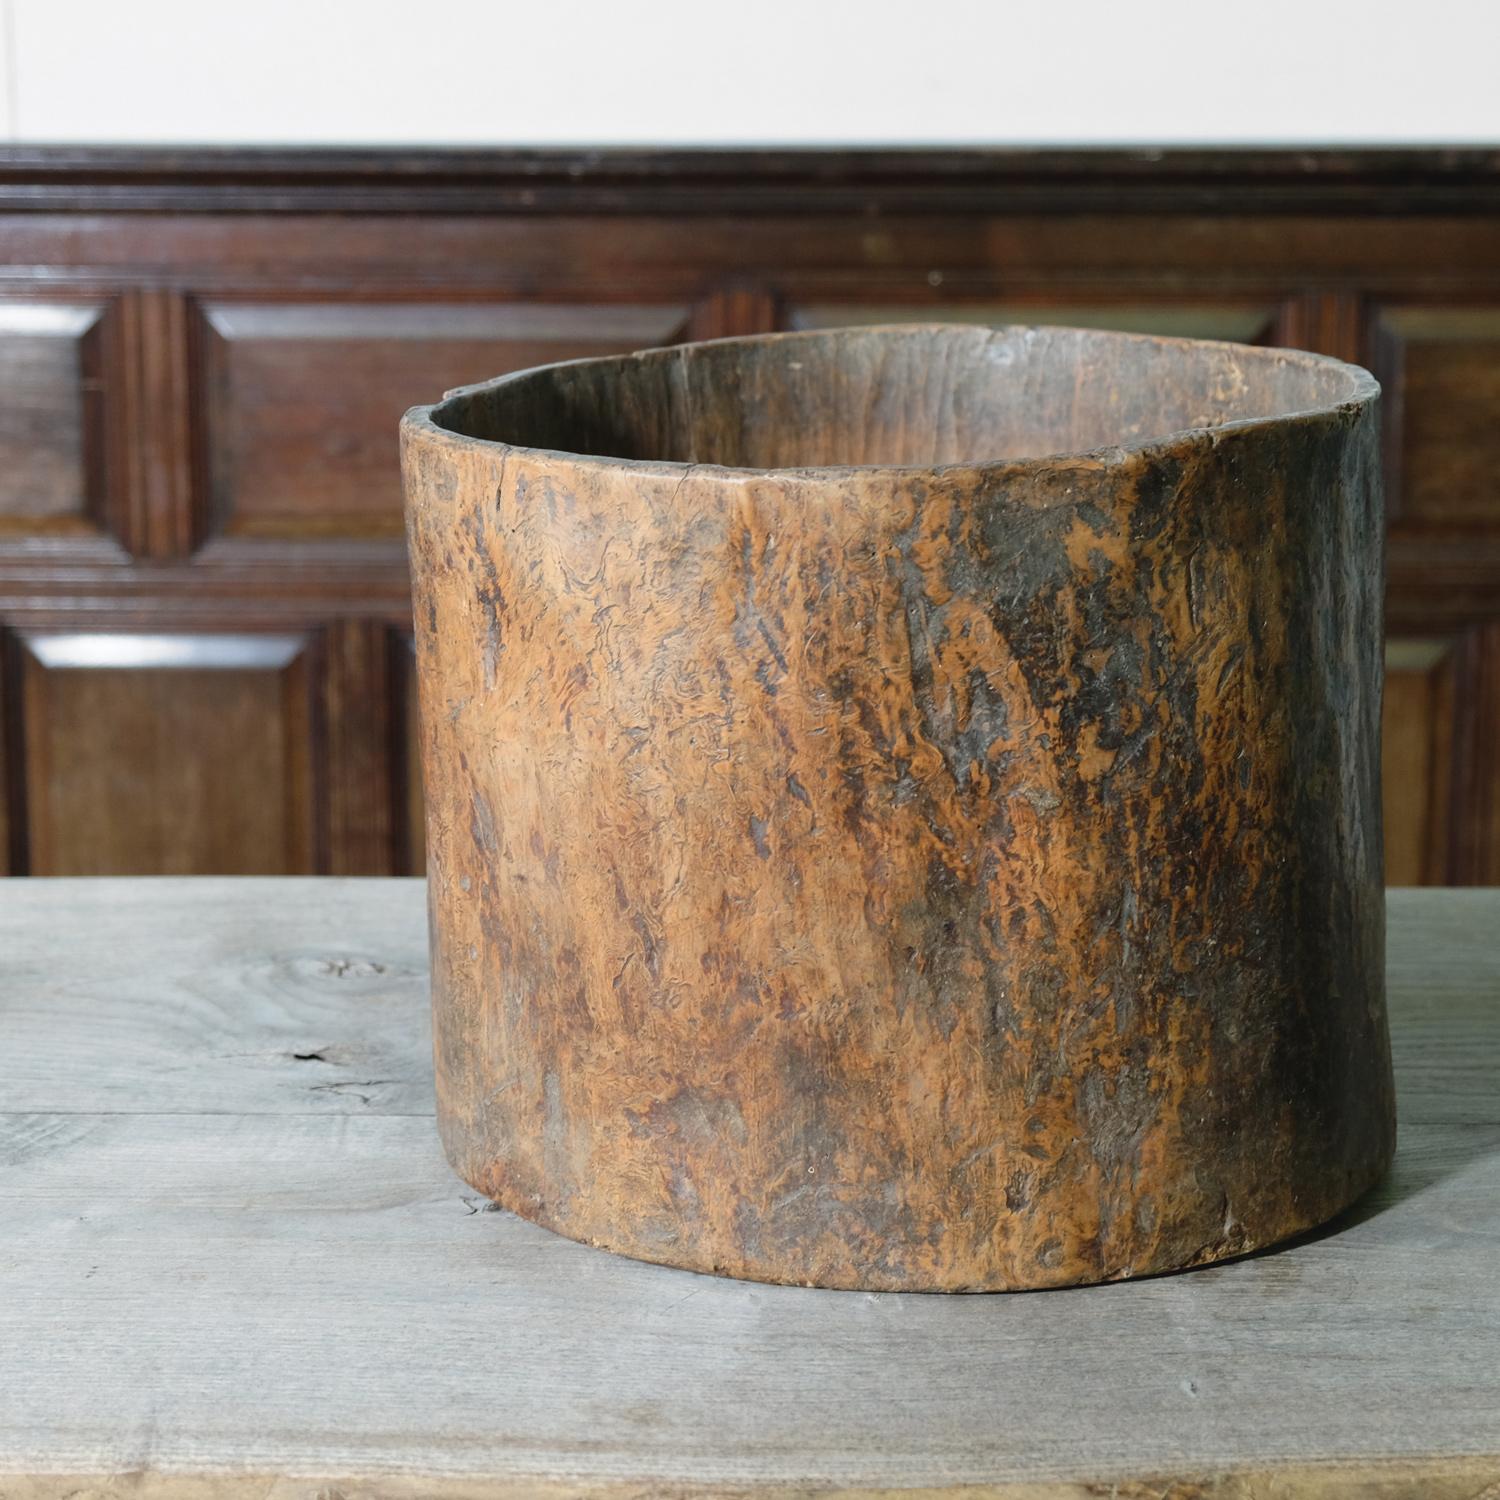 Hand-Carved Large Primitive Dug Out Vessel, Rustic French Pyrenees, 19th Century